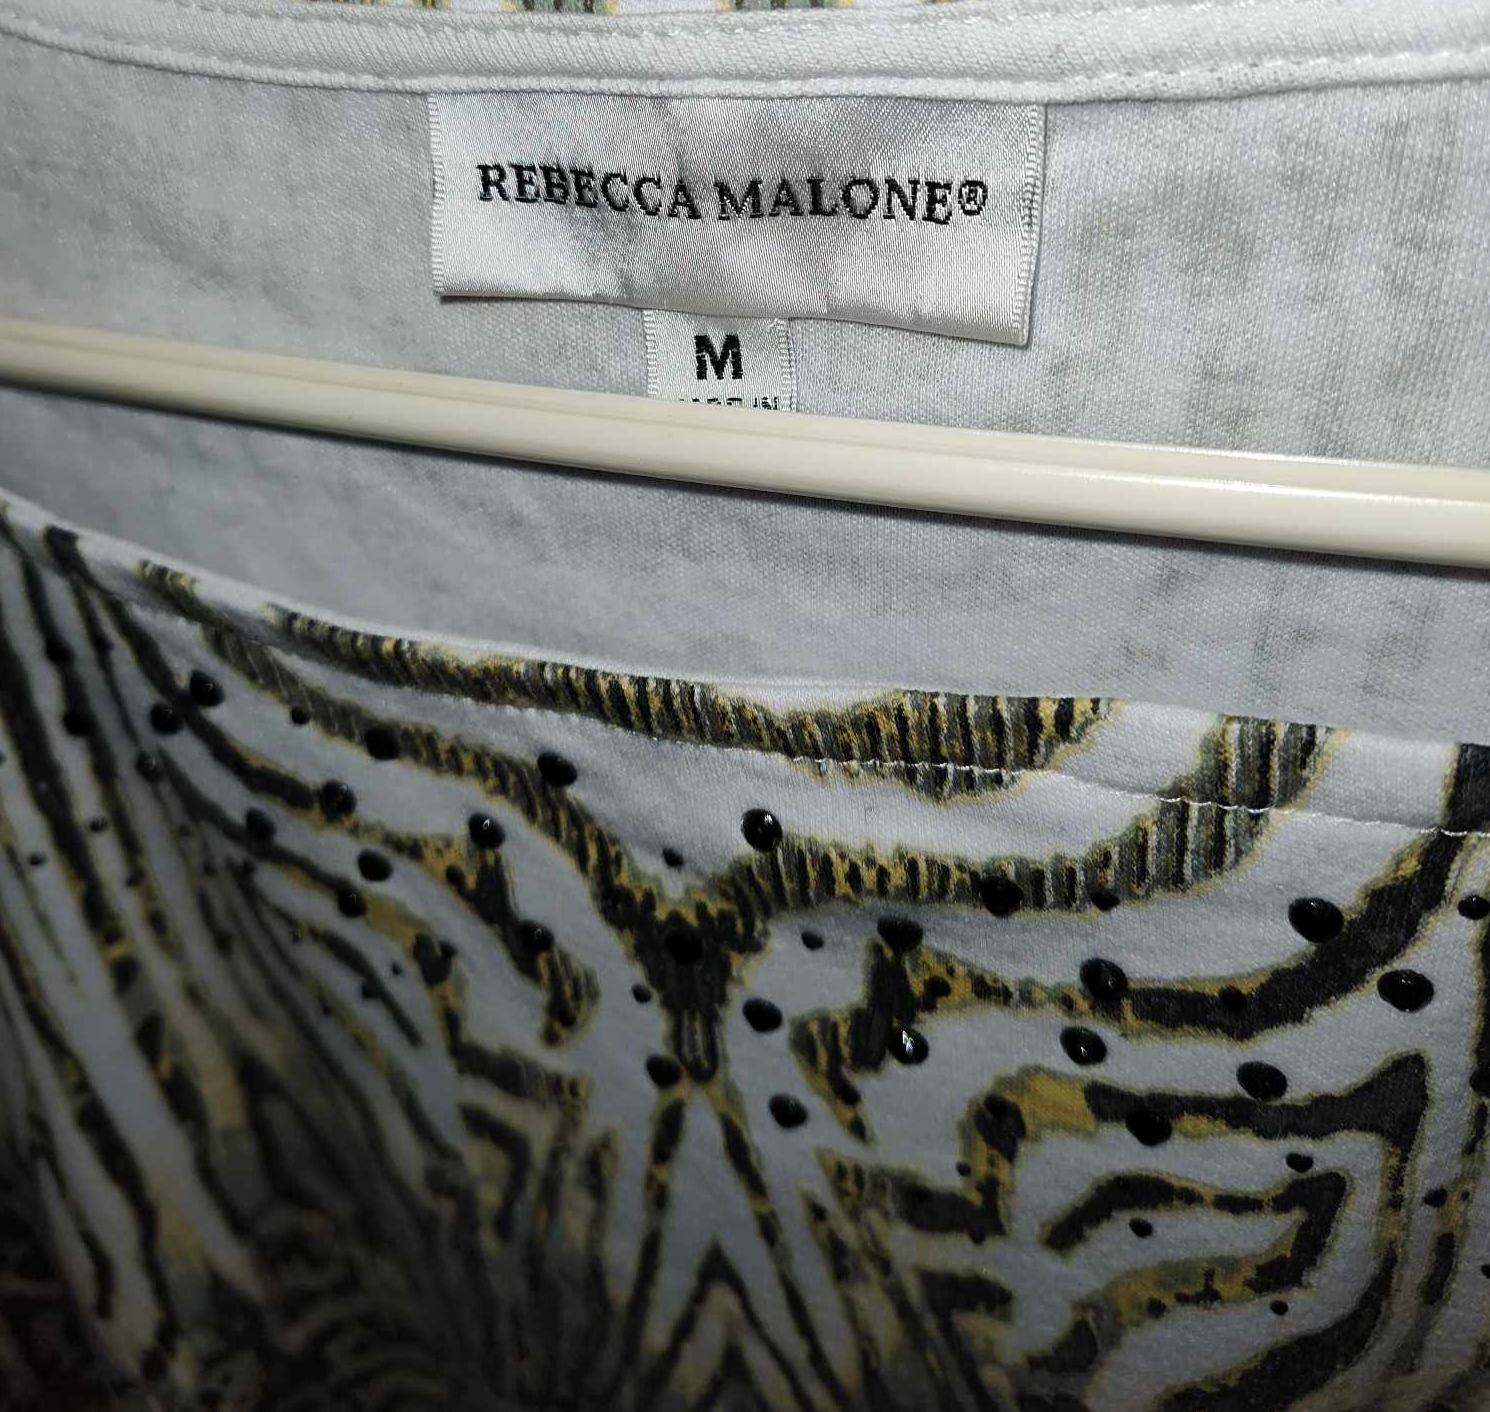 Rebecca Malone Animal Print Top with Half Sleeves - preowned